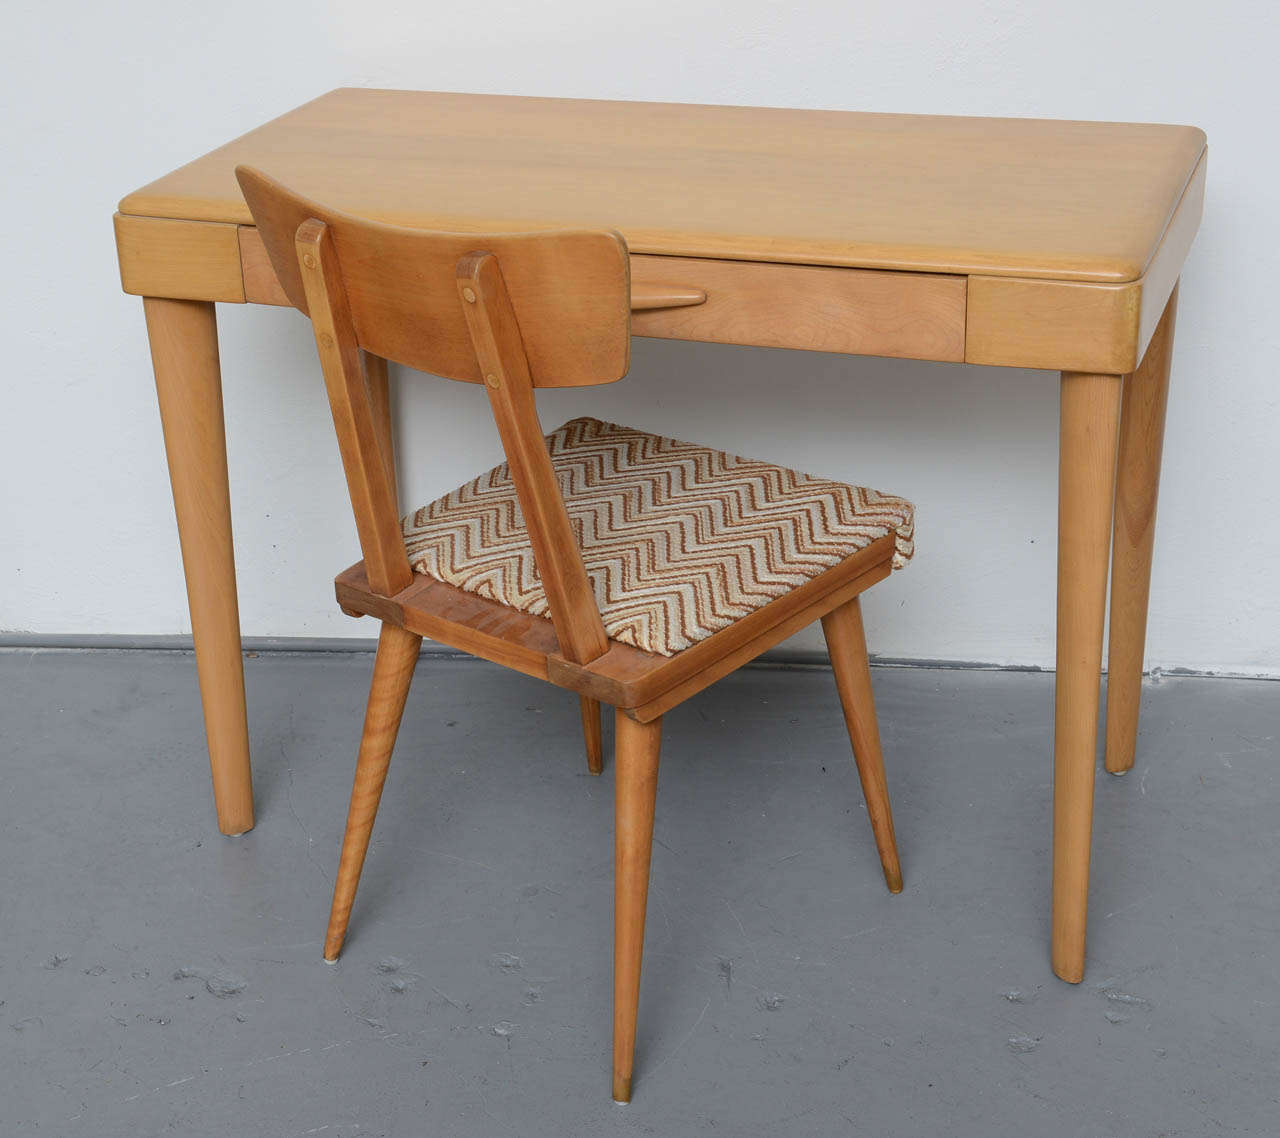 Beautiful Desk by Heywood Wakefield from Maple, circa 1965.  Desk is fully restored.   Chair does not come with the desk as it has been sold.